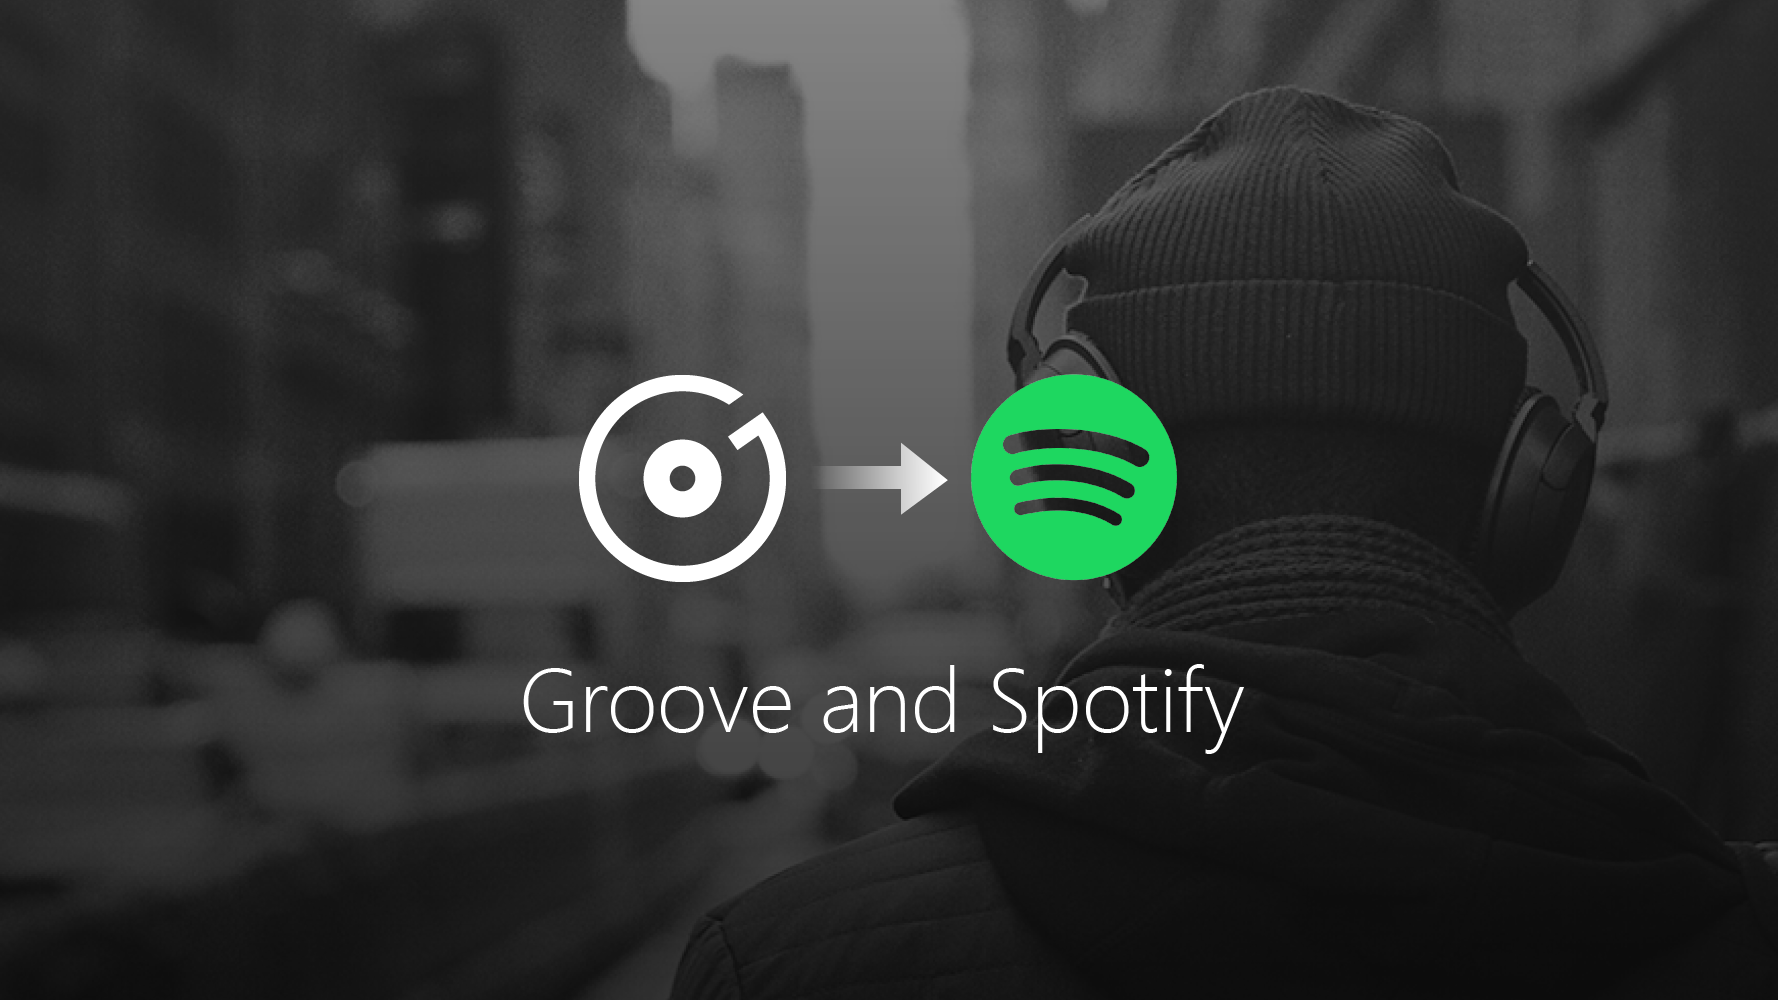 Groove would redirect to Spotify (Image: Microsoft)